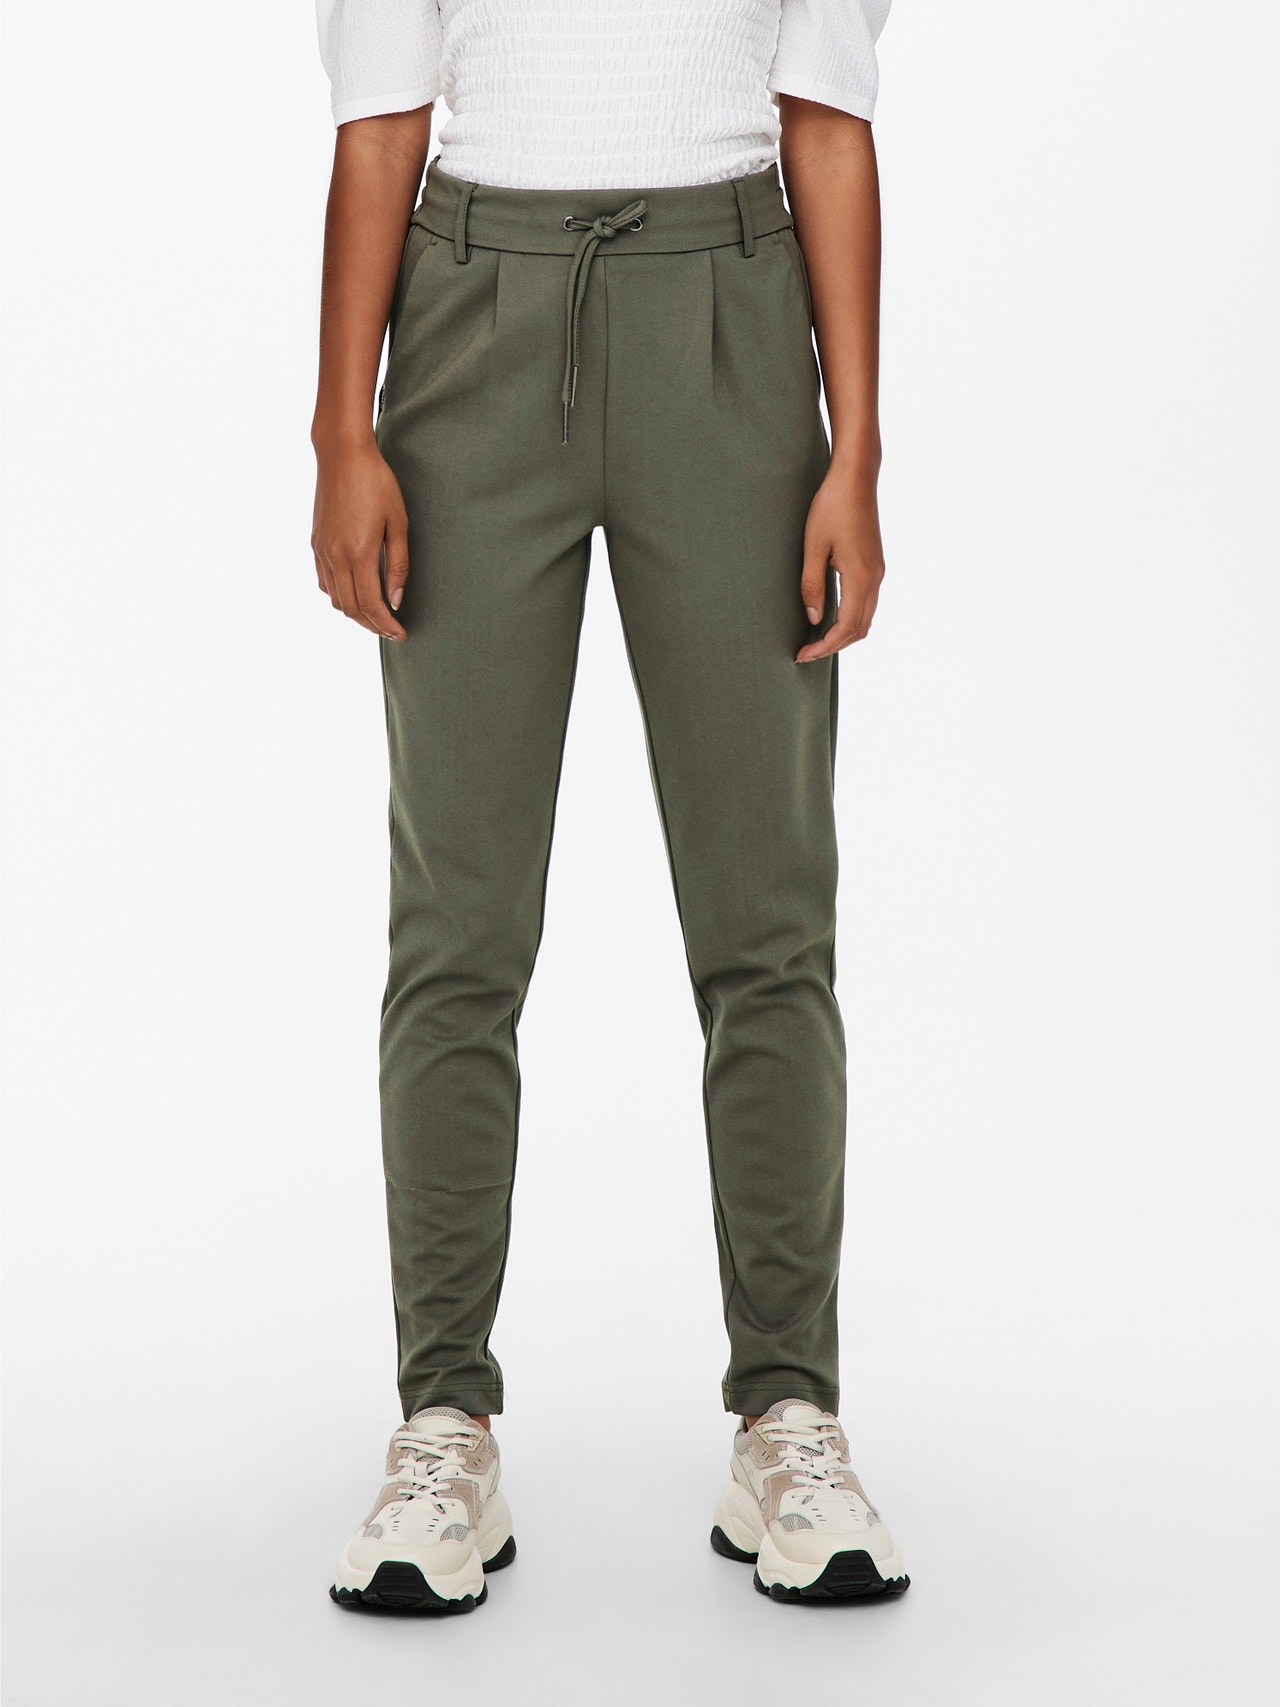 ONLY Poptrash Trousers -Bungee Cord - 15115847